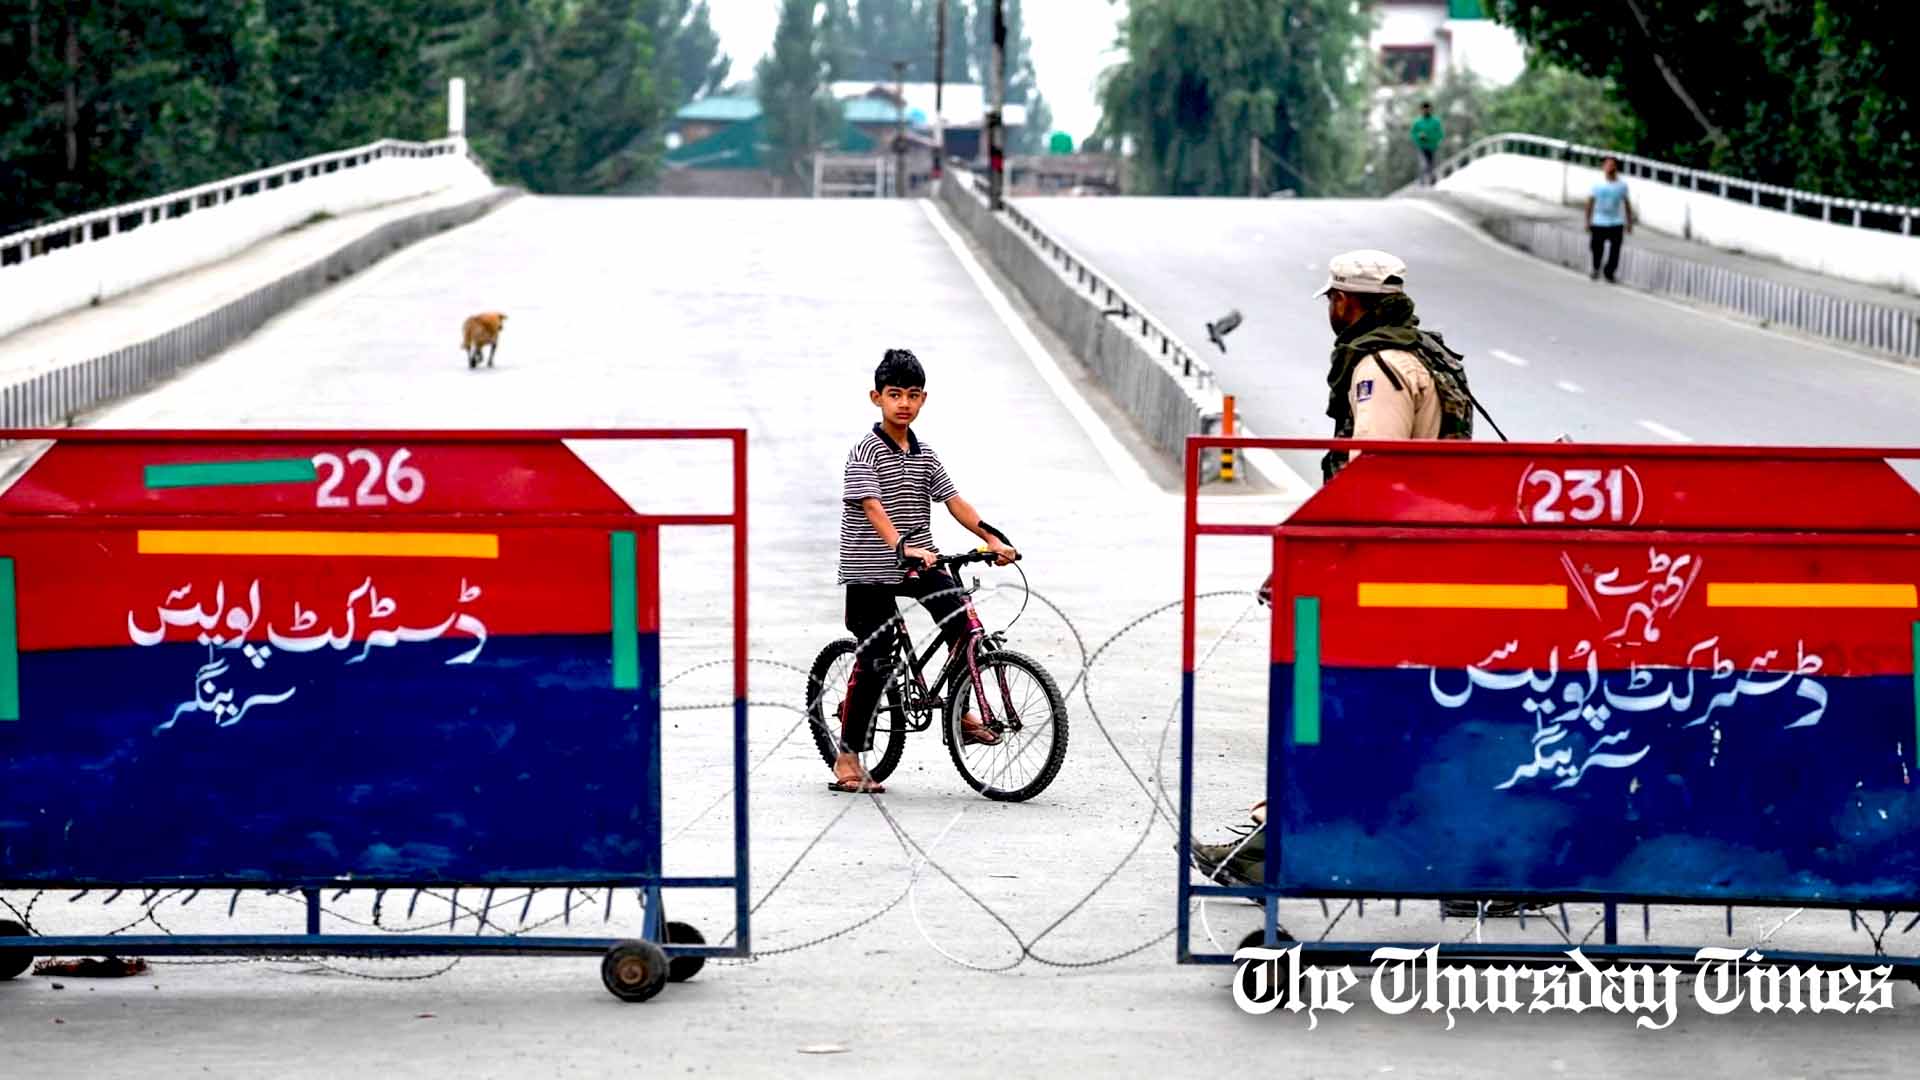 A file photo is shown of a police checkpoint in Srinagar, India. — FILE/THE THURSDAY TIMES